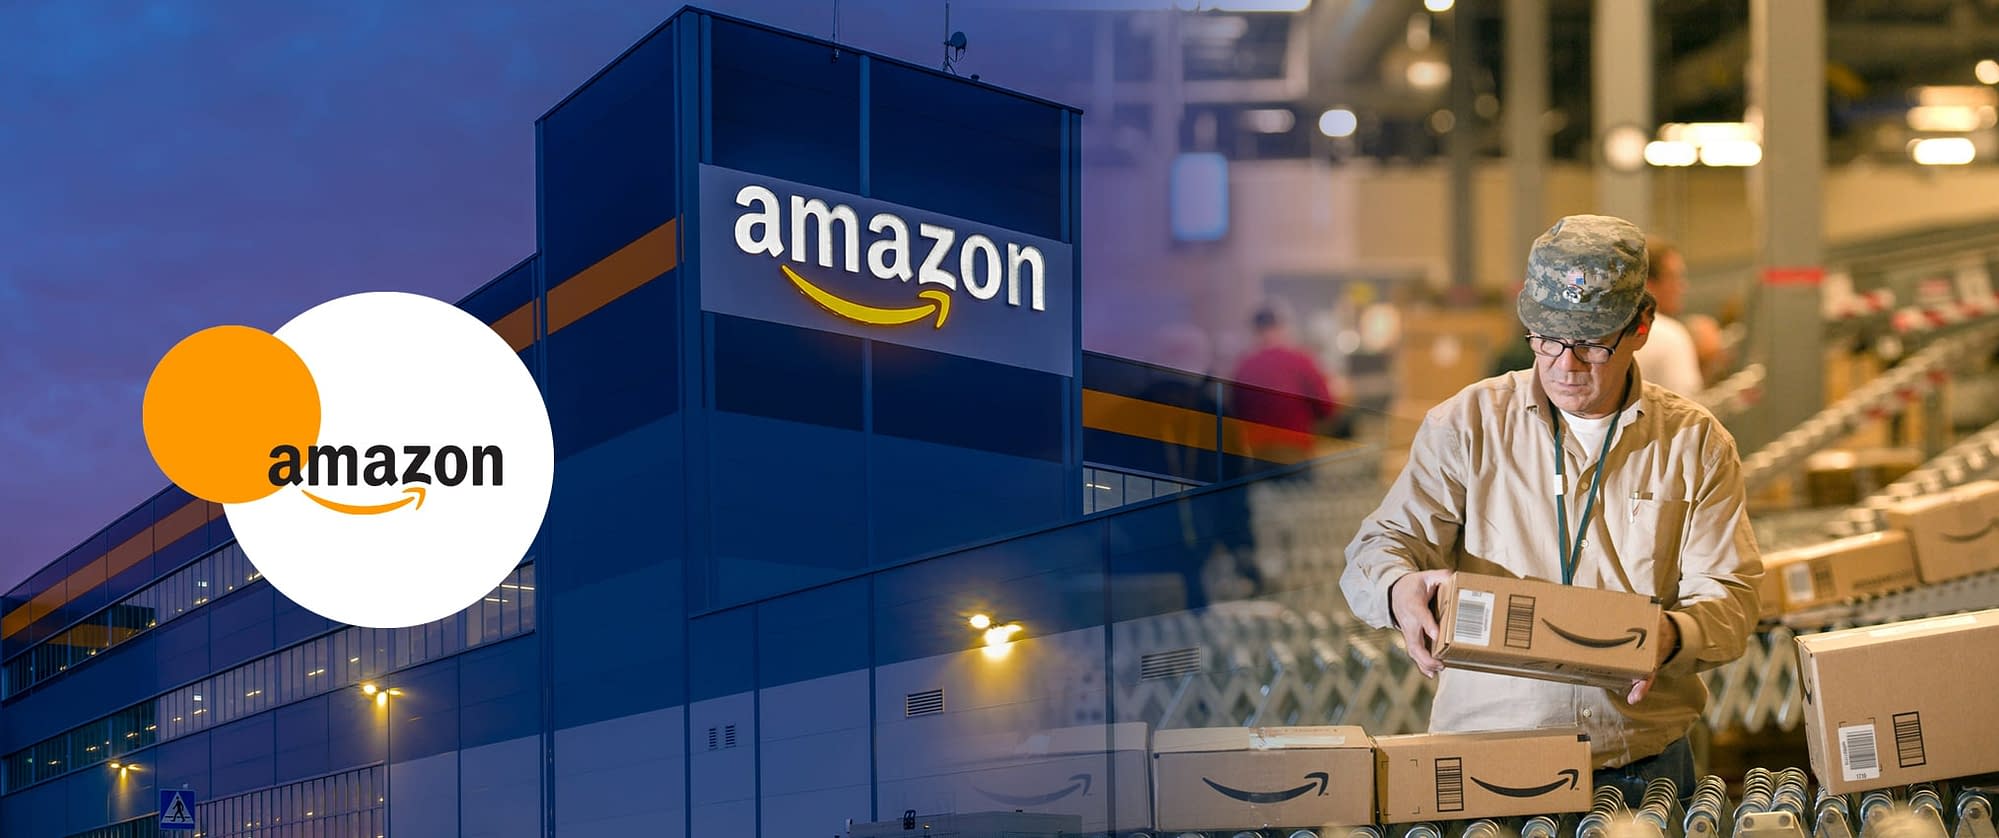 Amazon Raises the Temporary Payment of it's Warehouse Worker